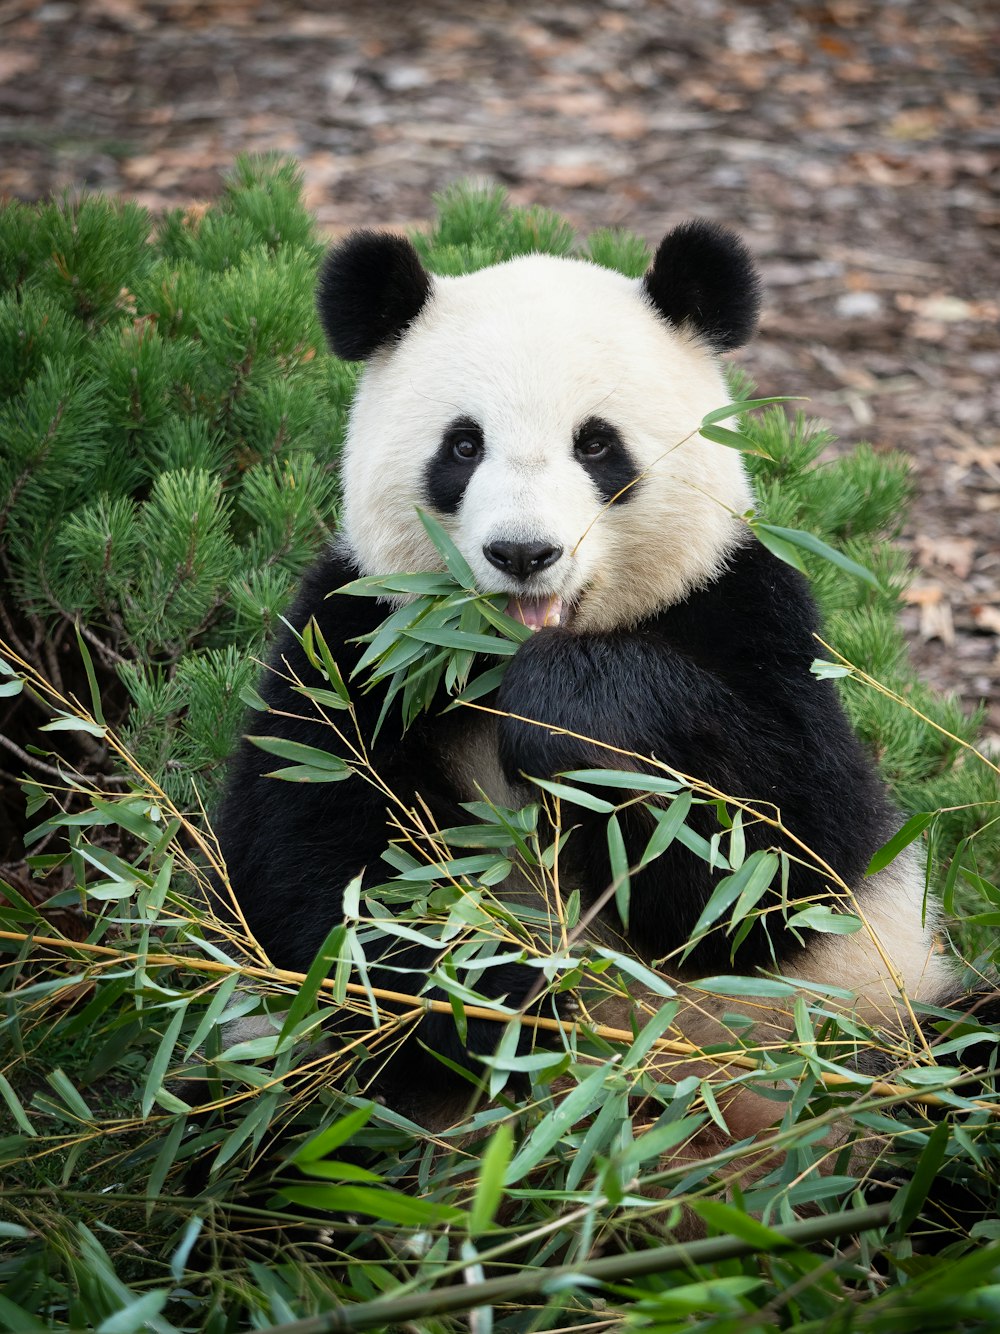 a panda bear sitting in the grass eating bamboo